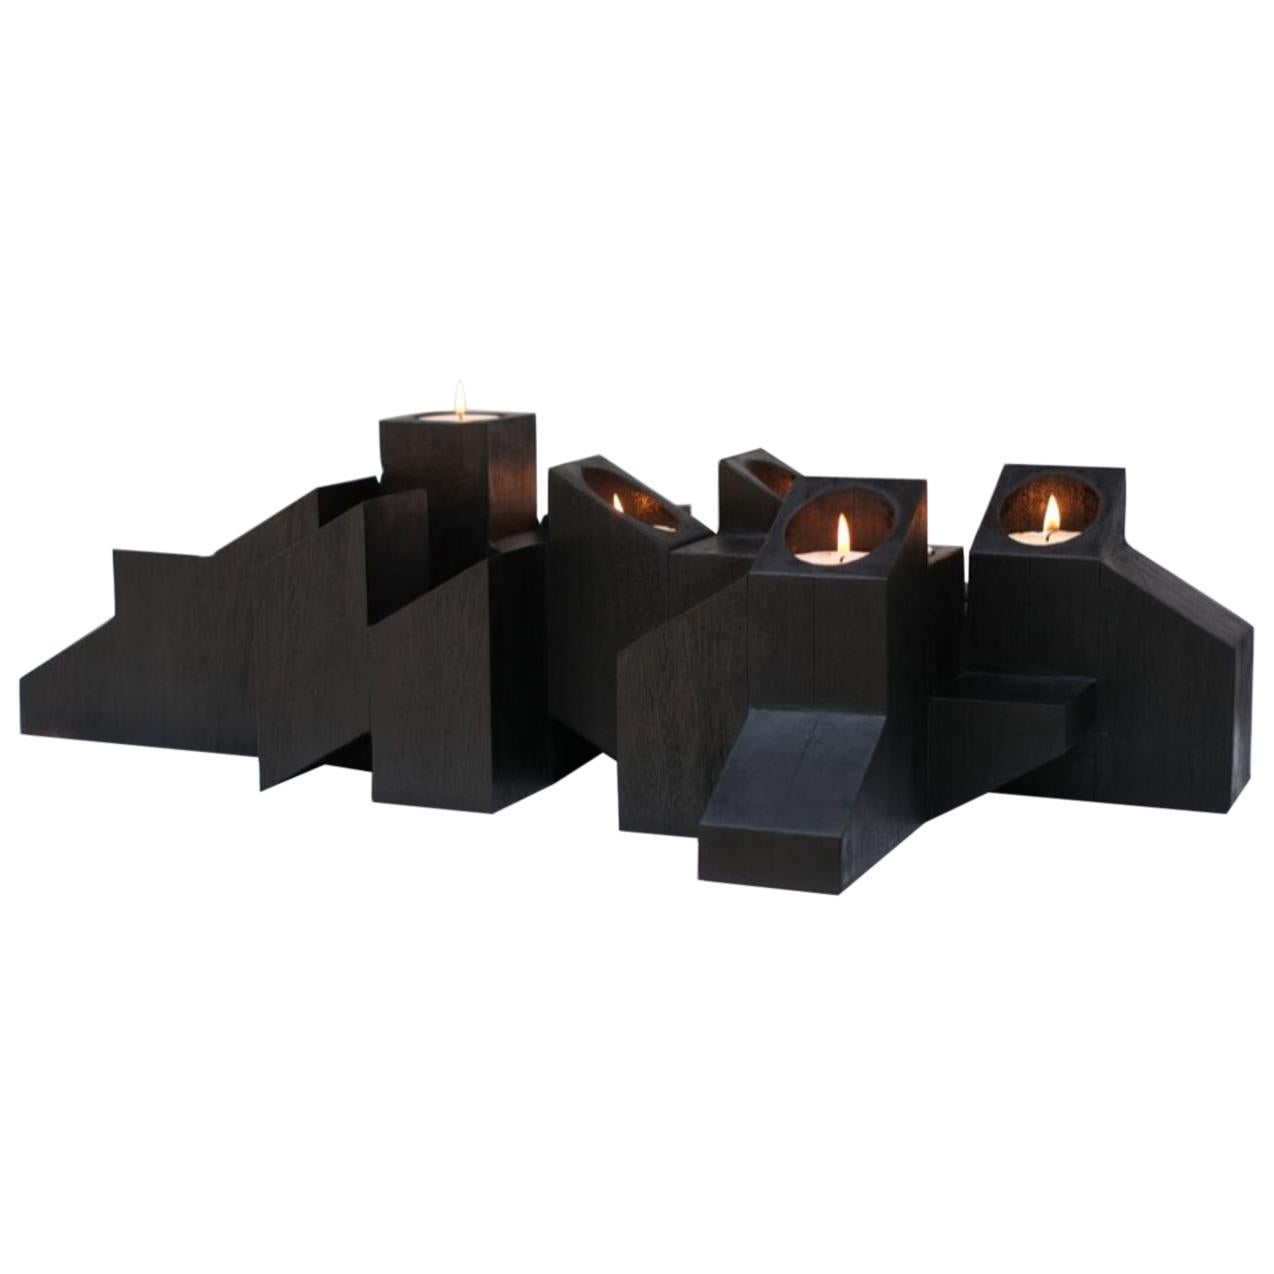 Black Skyline Candle Light in African Walnut by Arno Declercq